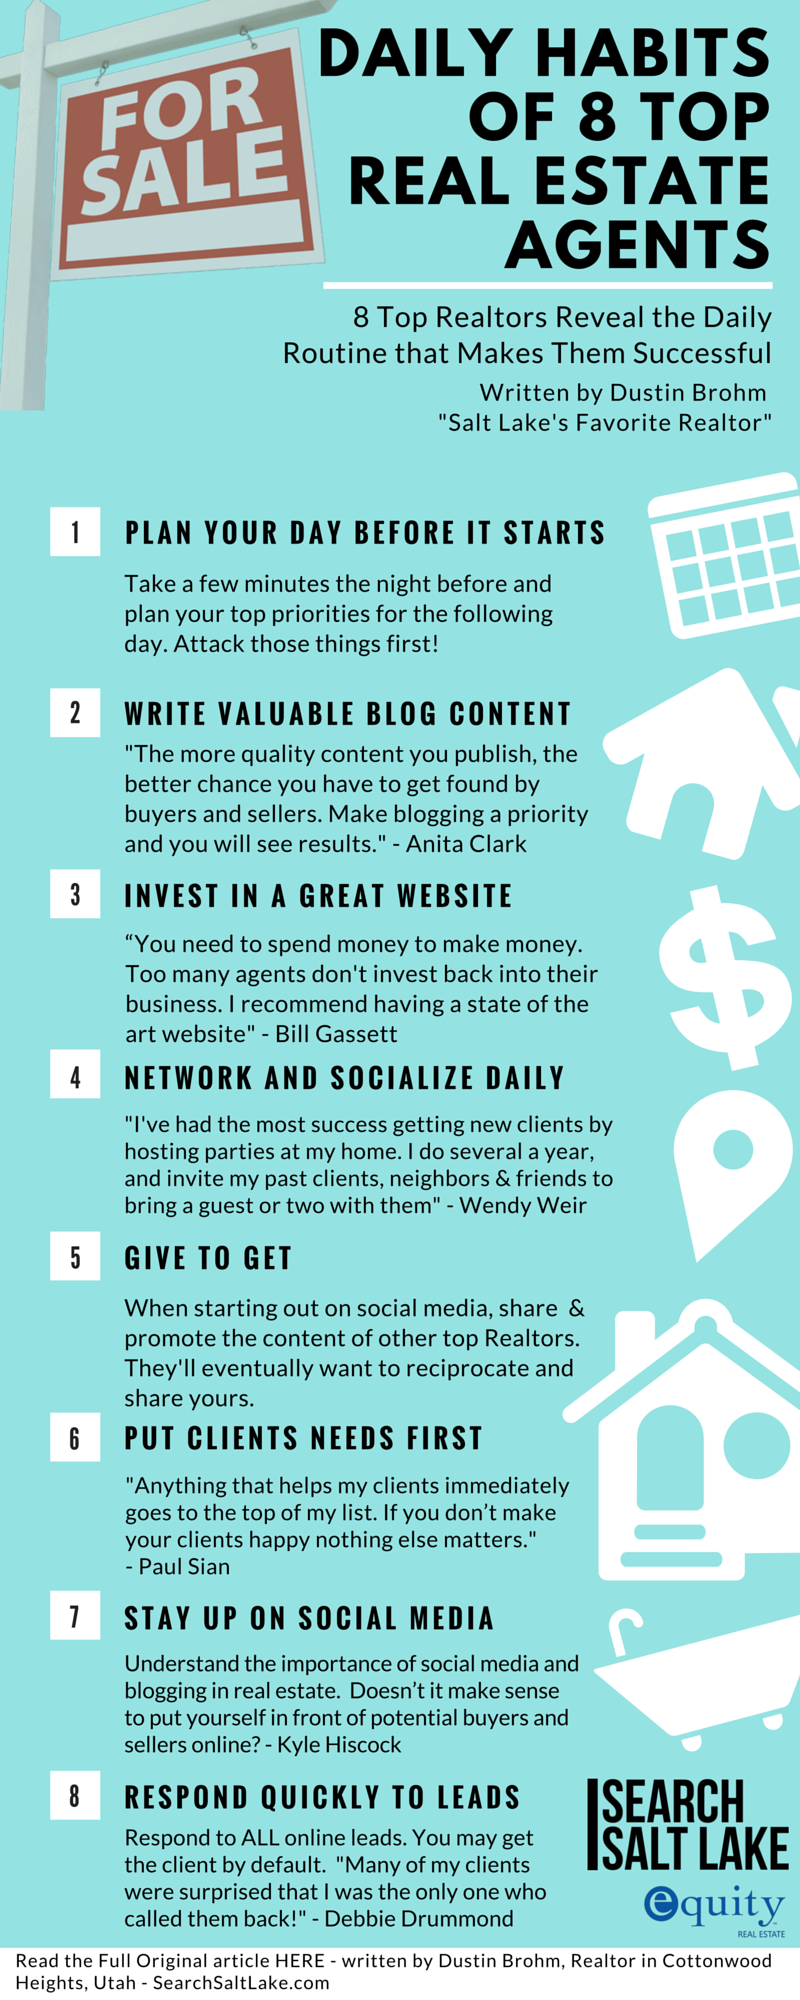 Daily Habits of Top Real Estate Agents- INFOGRAPHIC